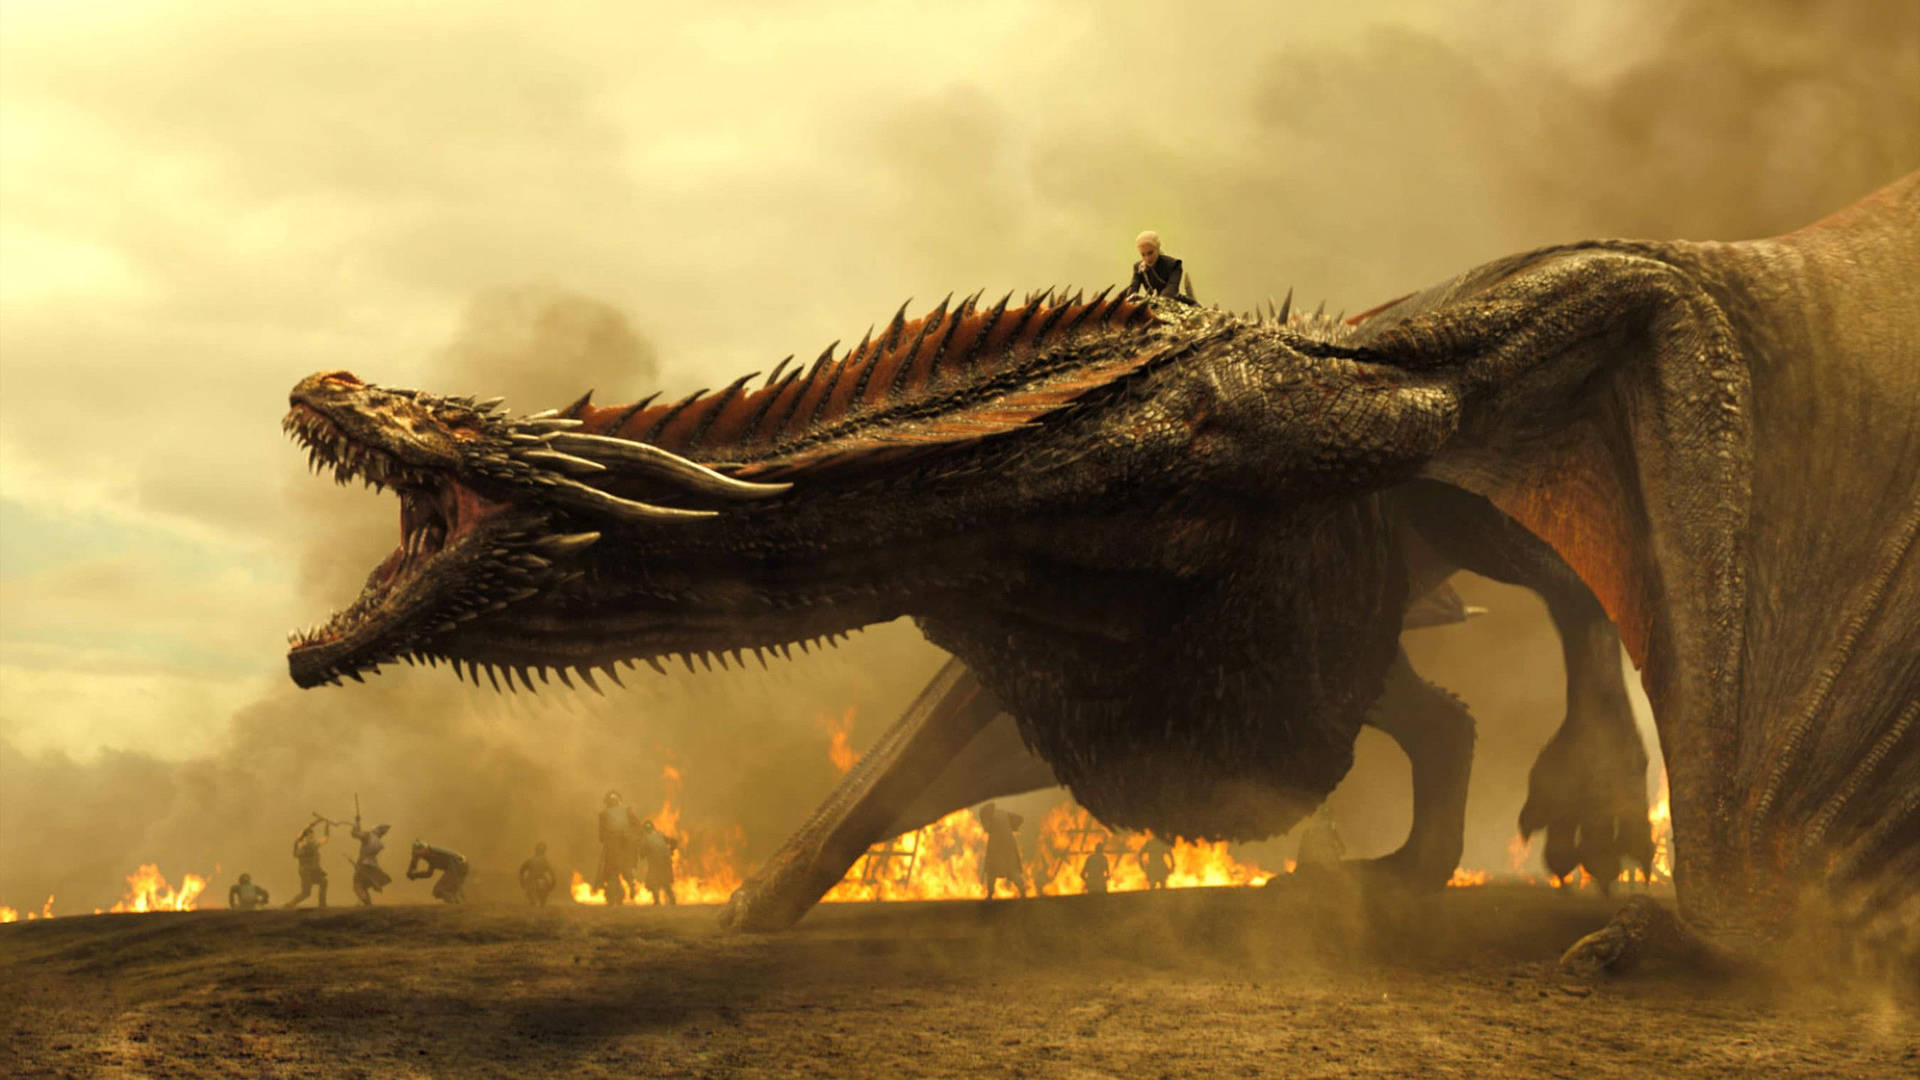 Hd Fire Dragon Of Game Of Thrones Background